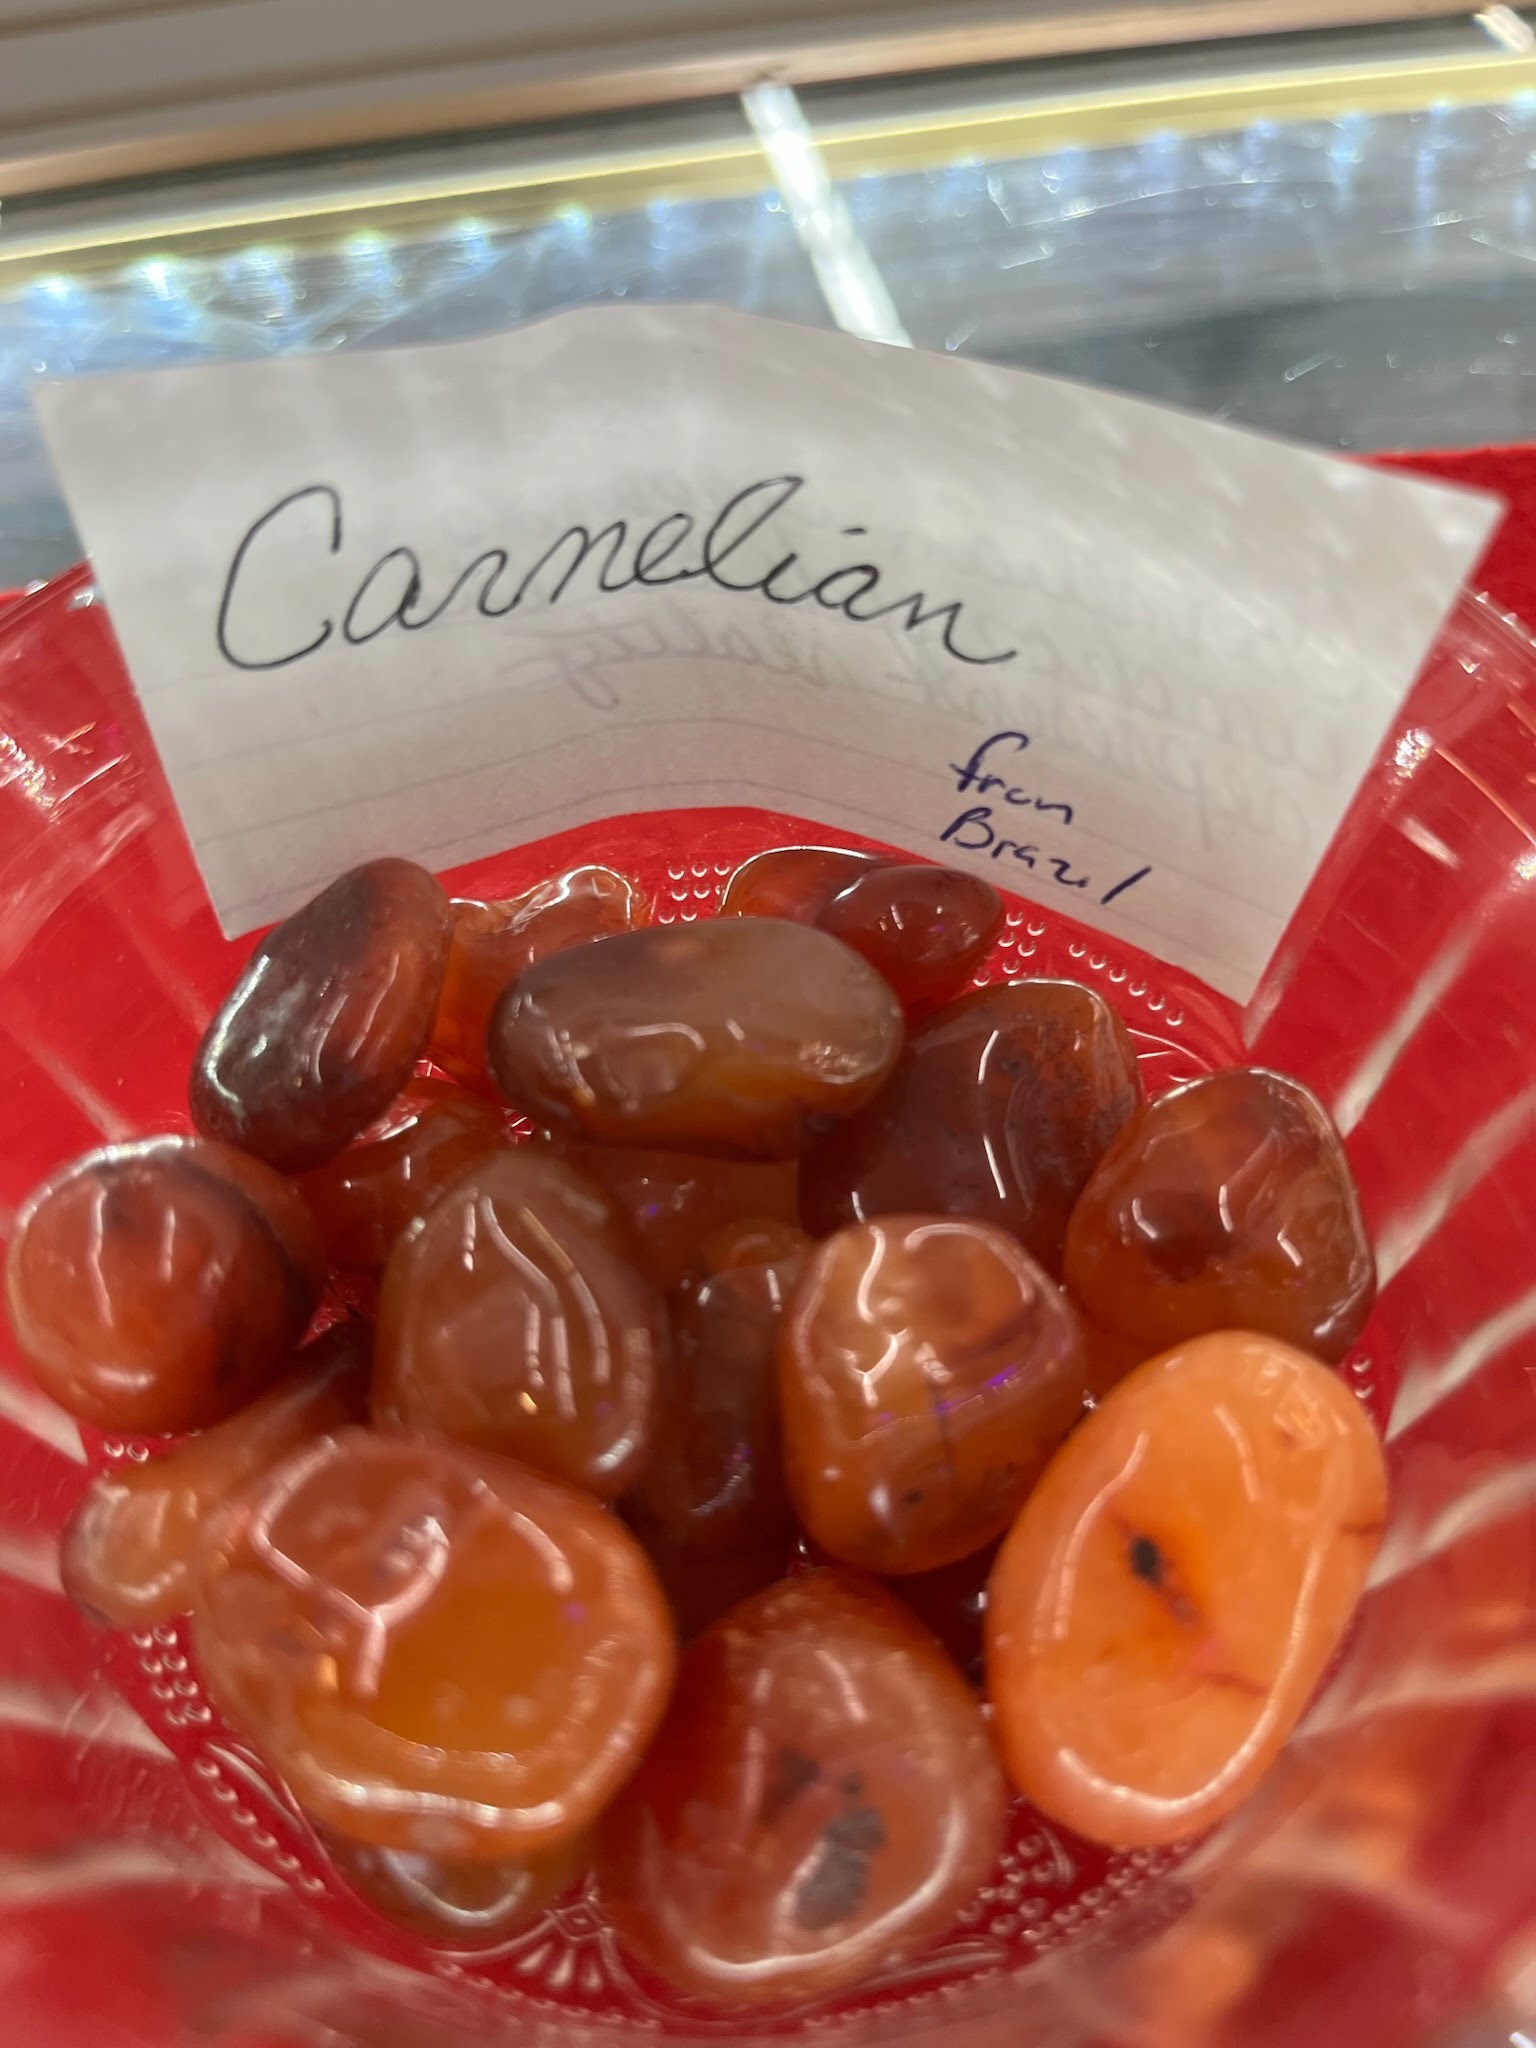 A red bowl of carmelian candy.